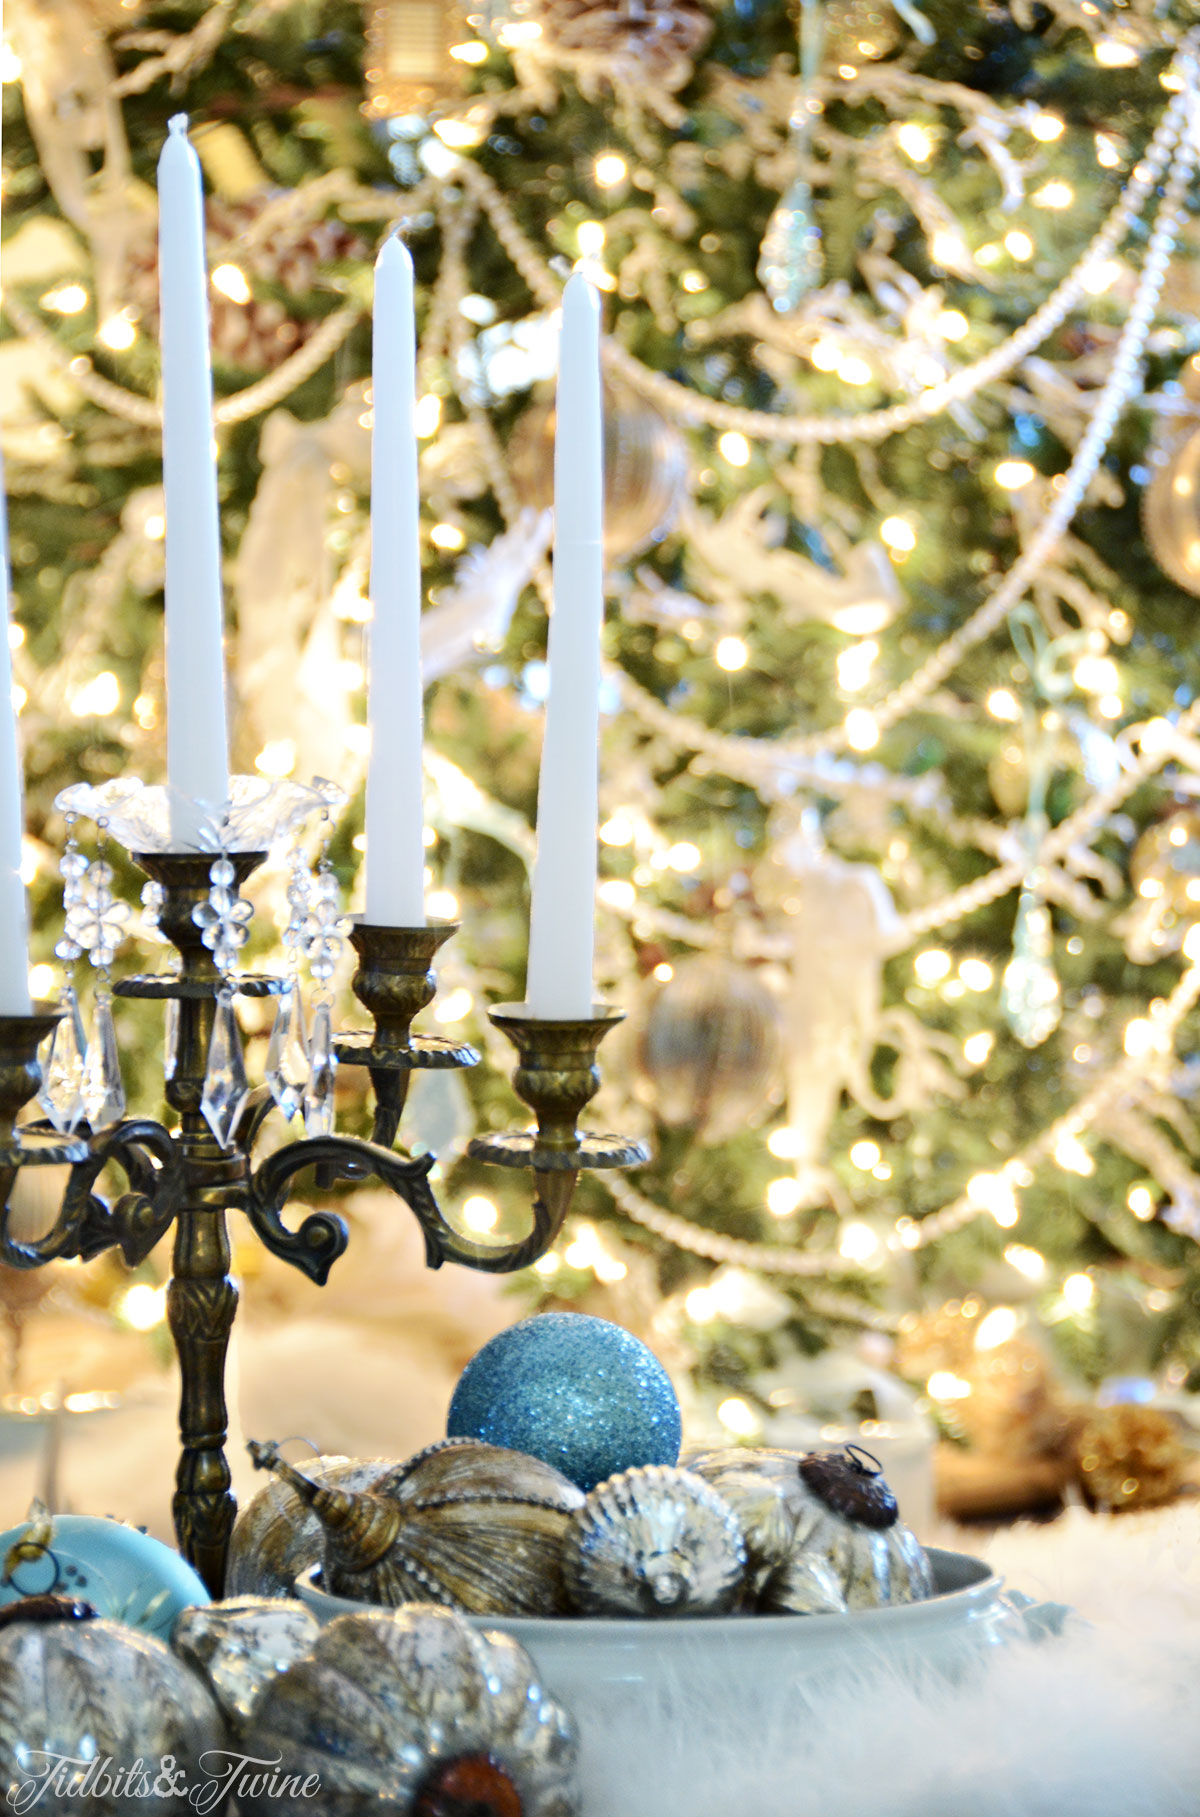 Gold candelabra next to ironstone bowl full of ornaments with Christmas tree in the background